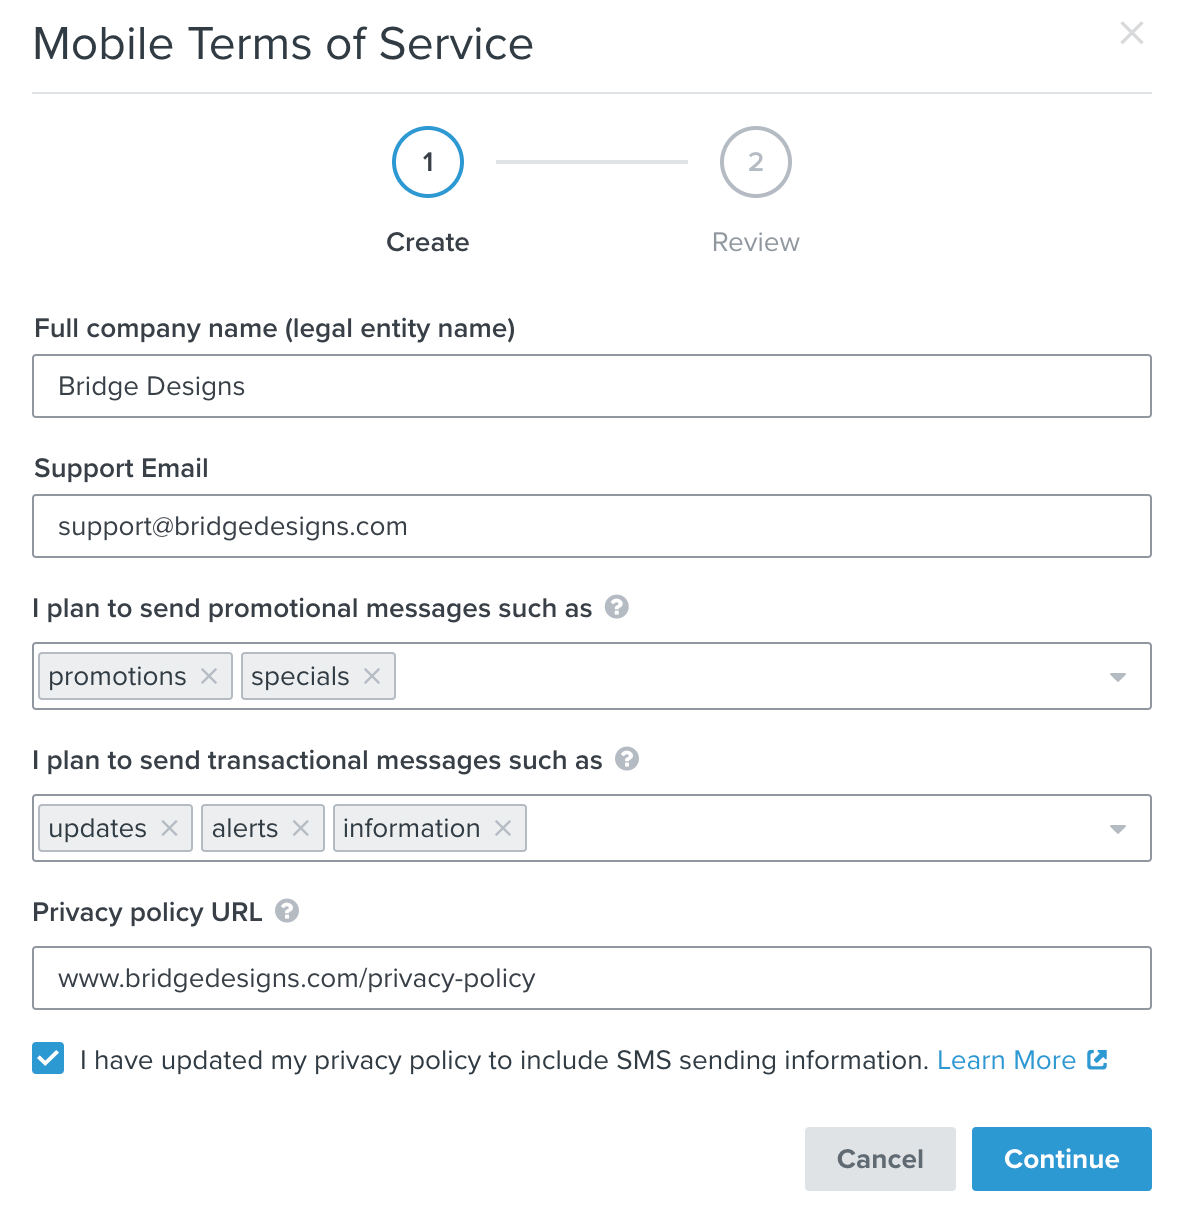 Inputted company and use case information for a Mobile Terms of Service